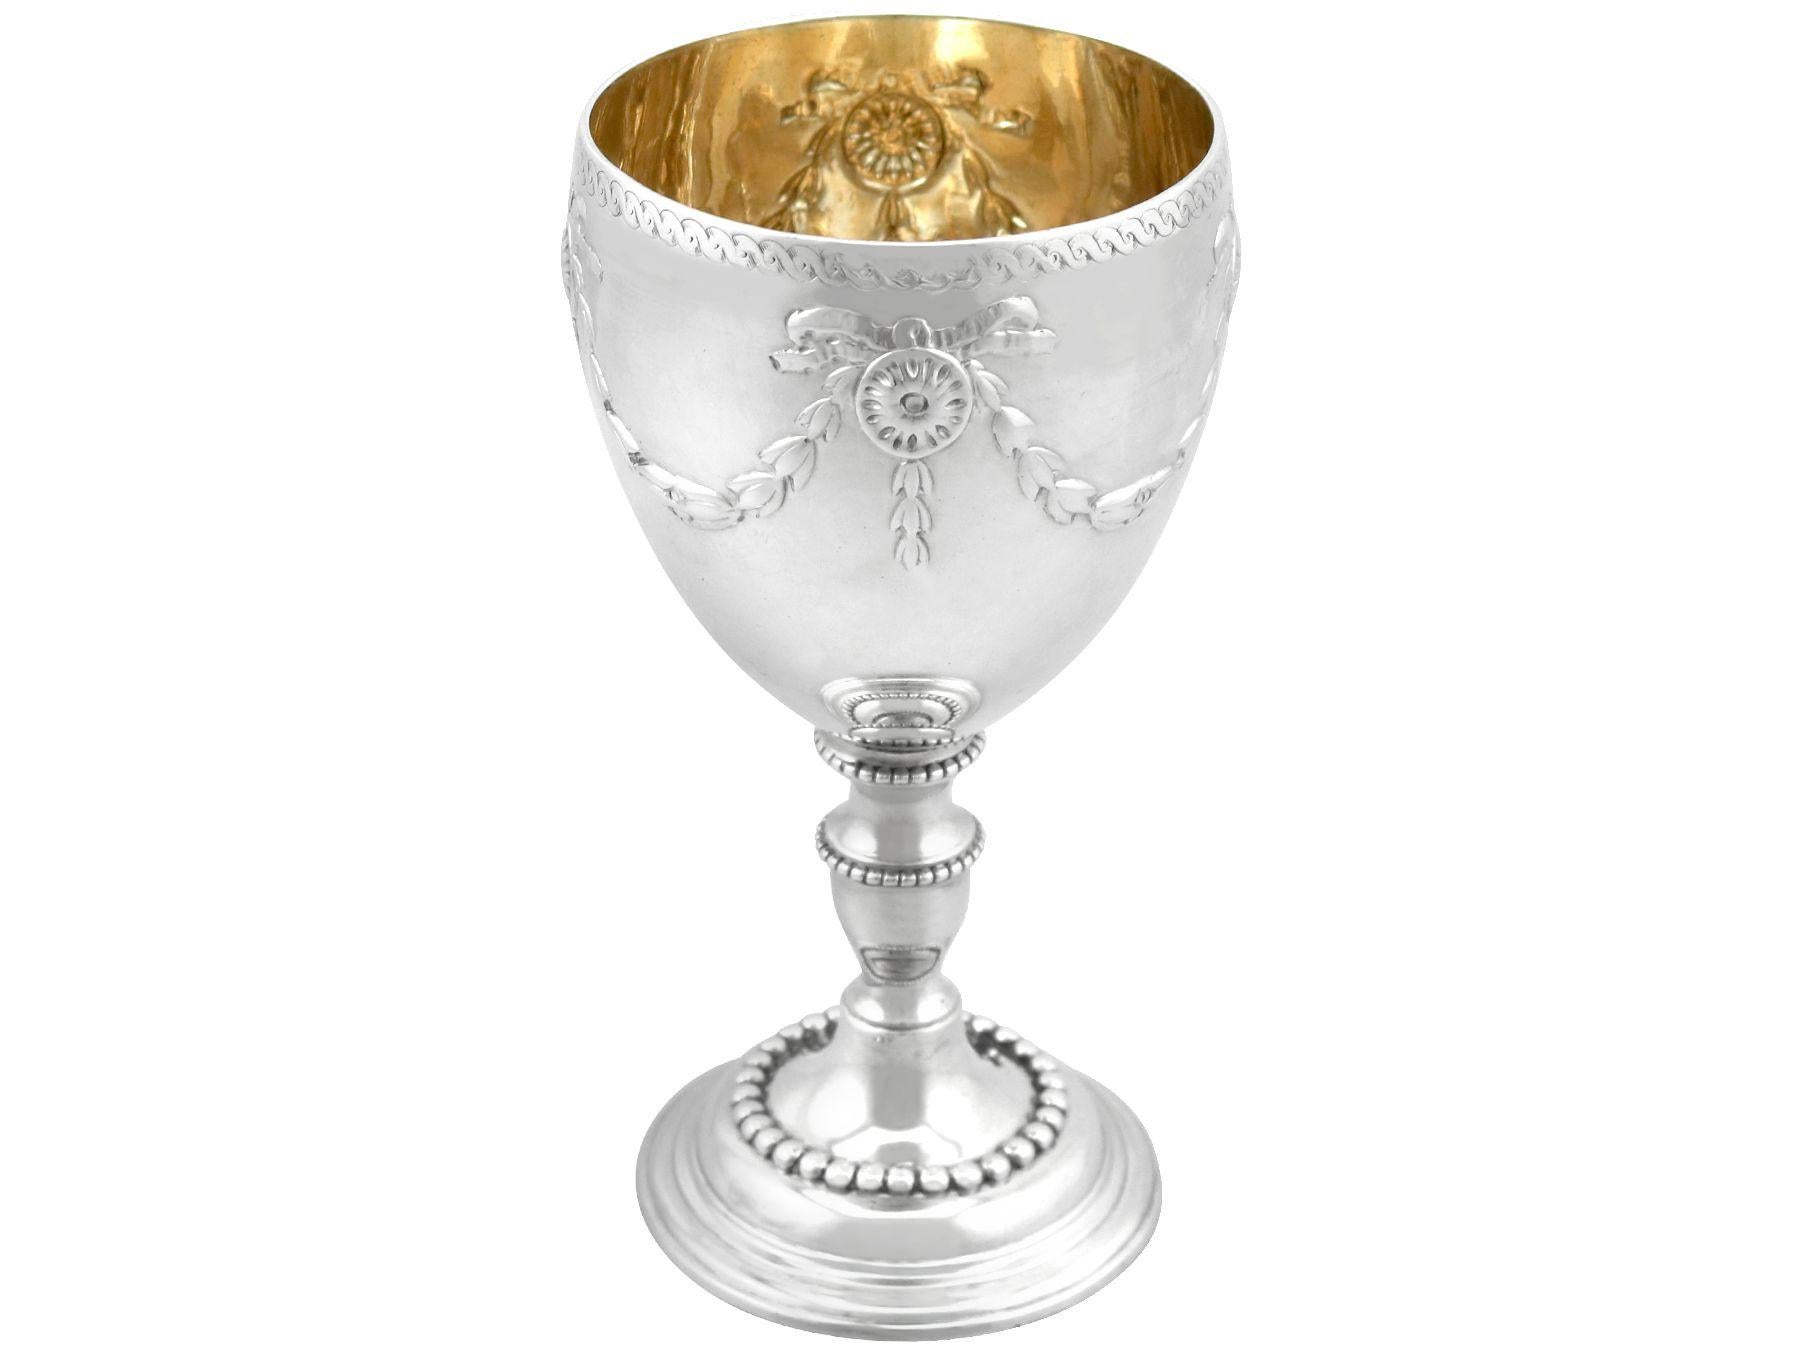 An exceptional, fine and impressive antique George III English sterling silver goblet; an addition to our Georgian wine and drinks related silverware collection

This exceptional antique Georgian sterling silver goblet has a plain circular bell